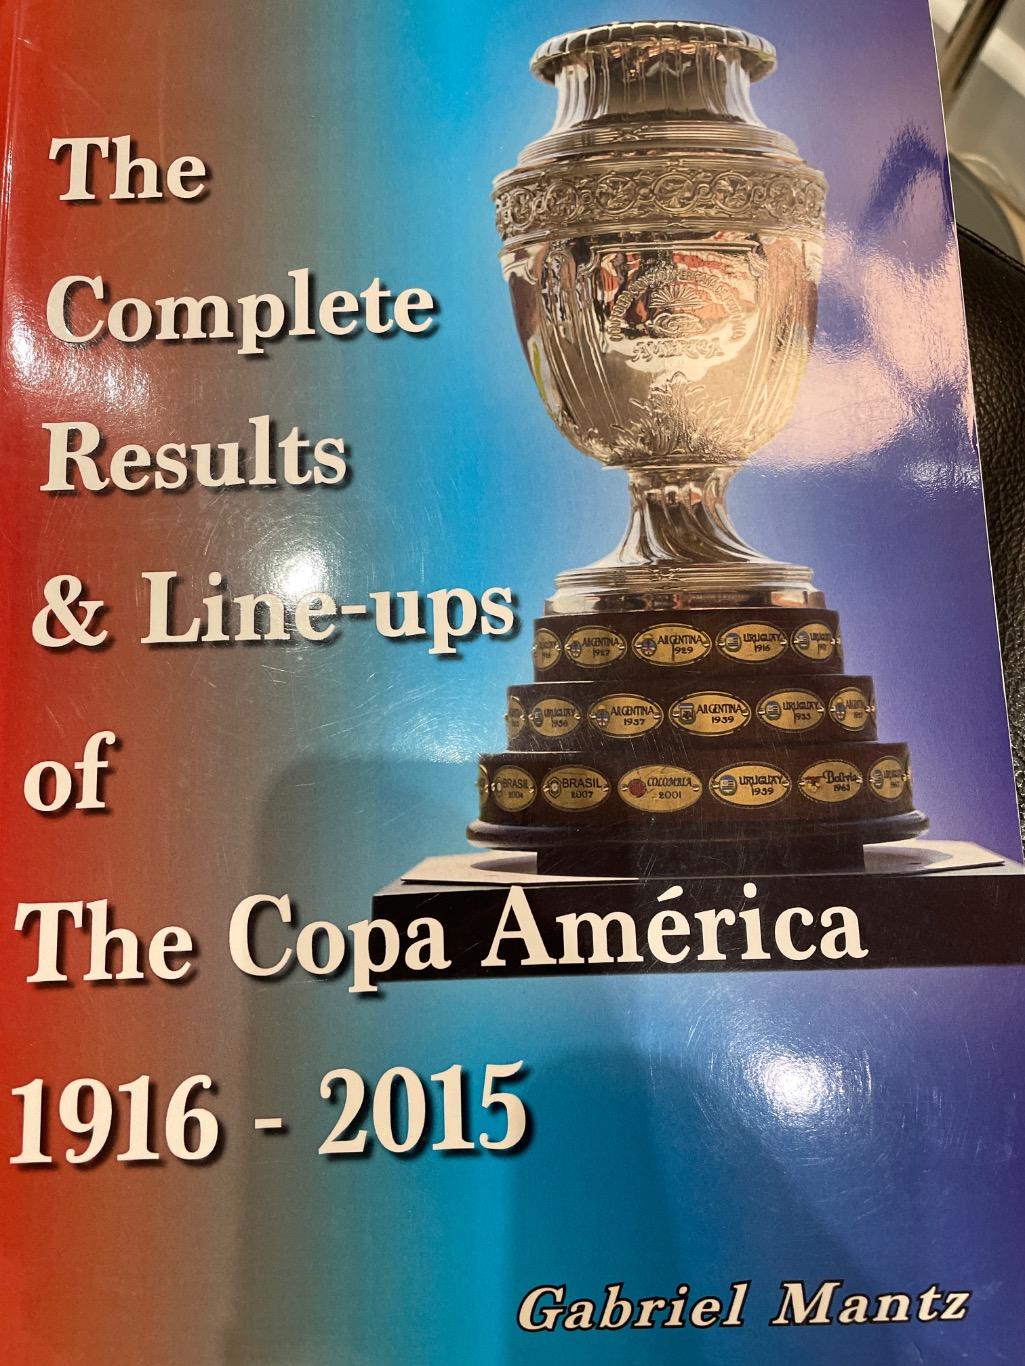 The complete results of the Copa America 1916-2015